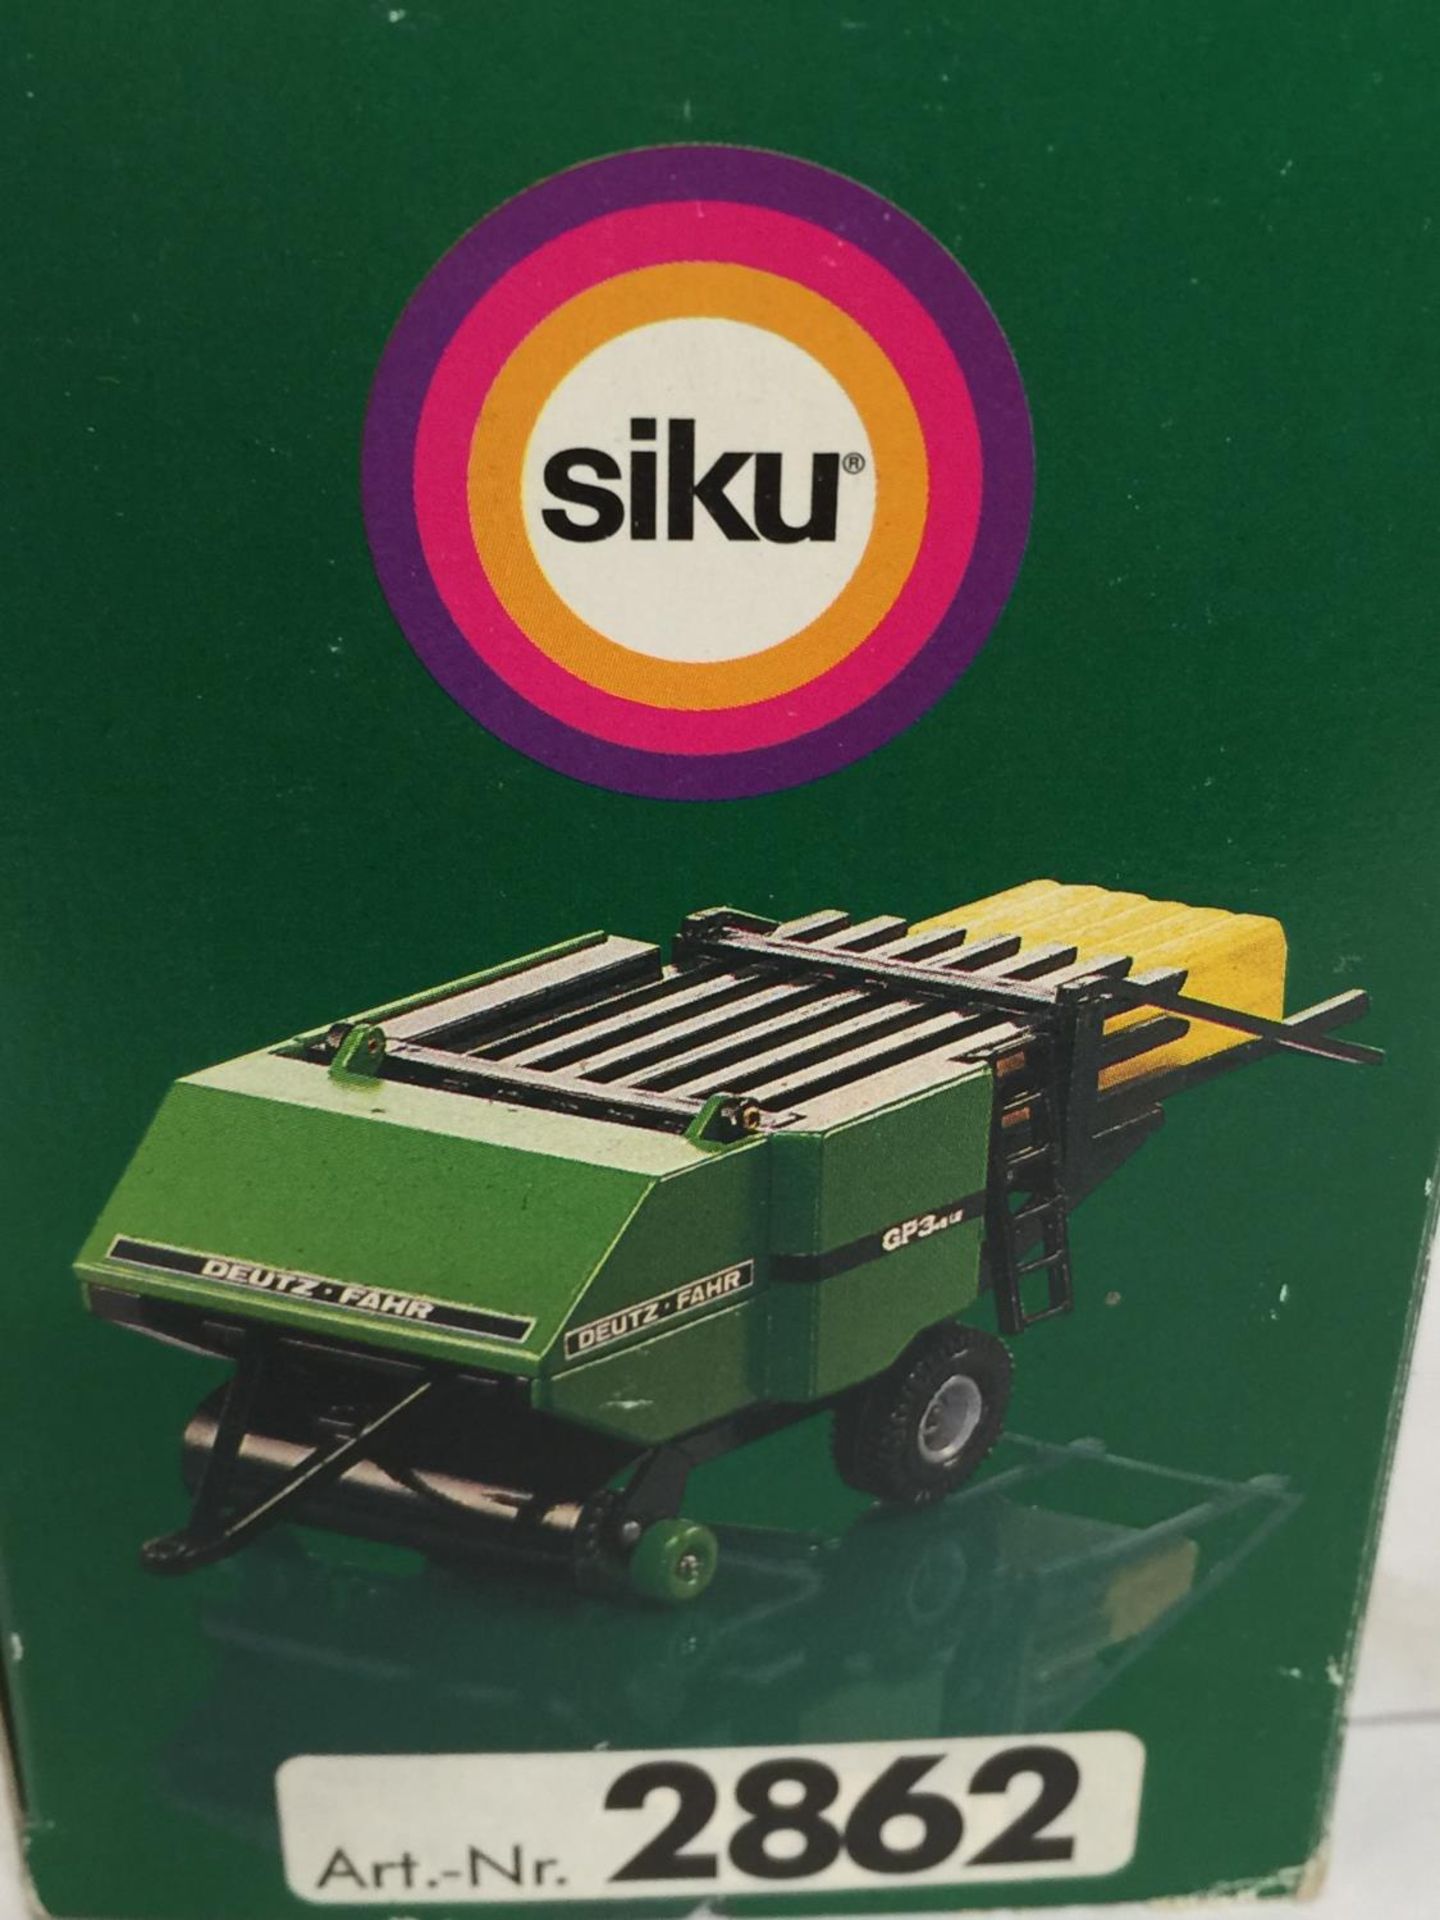 TWO BOXED FARM MODELS, A SCHUCO FENDT TRACTOR, 1/43 SCALE AND A SIKU DEUTZ BALER, 1/32 SCALE - Image 5 of 5